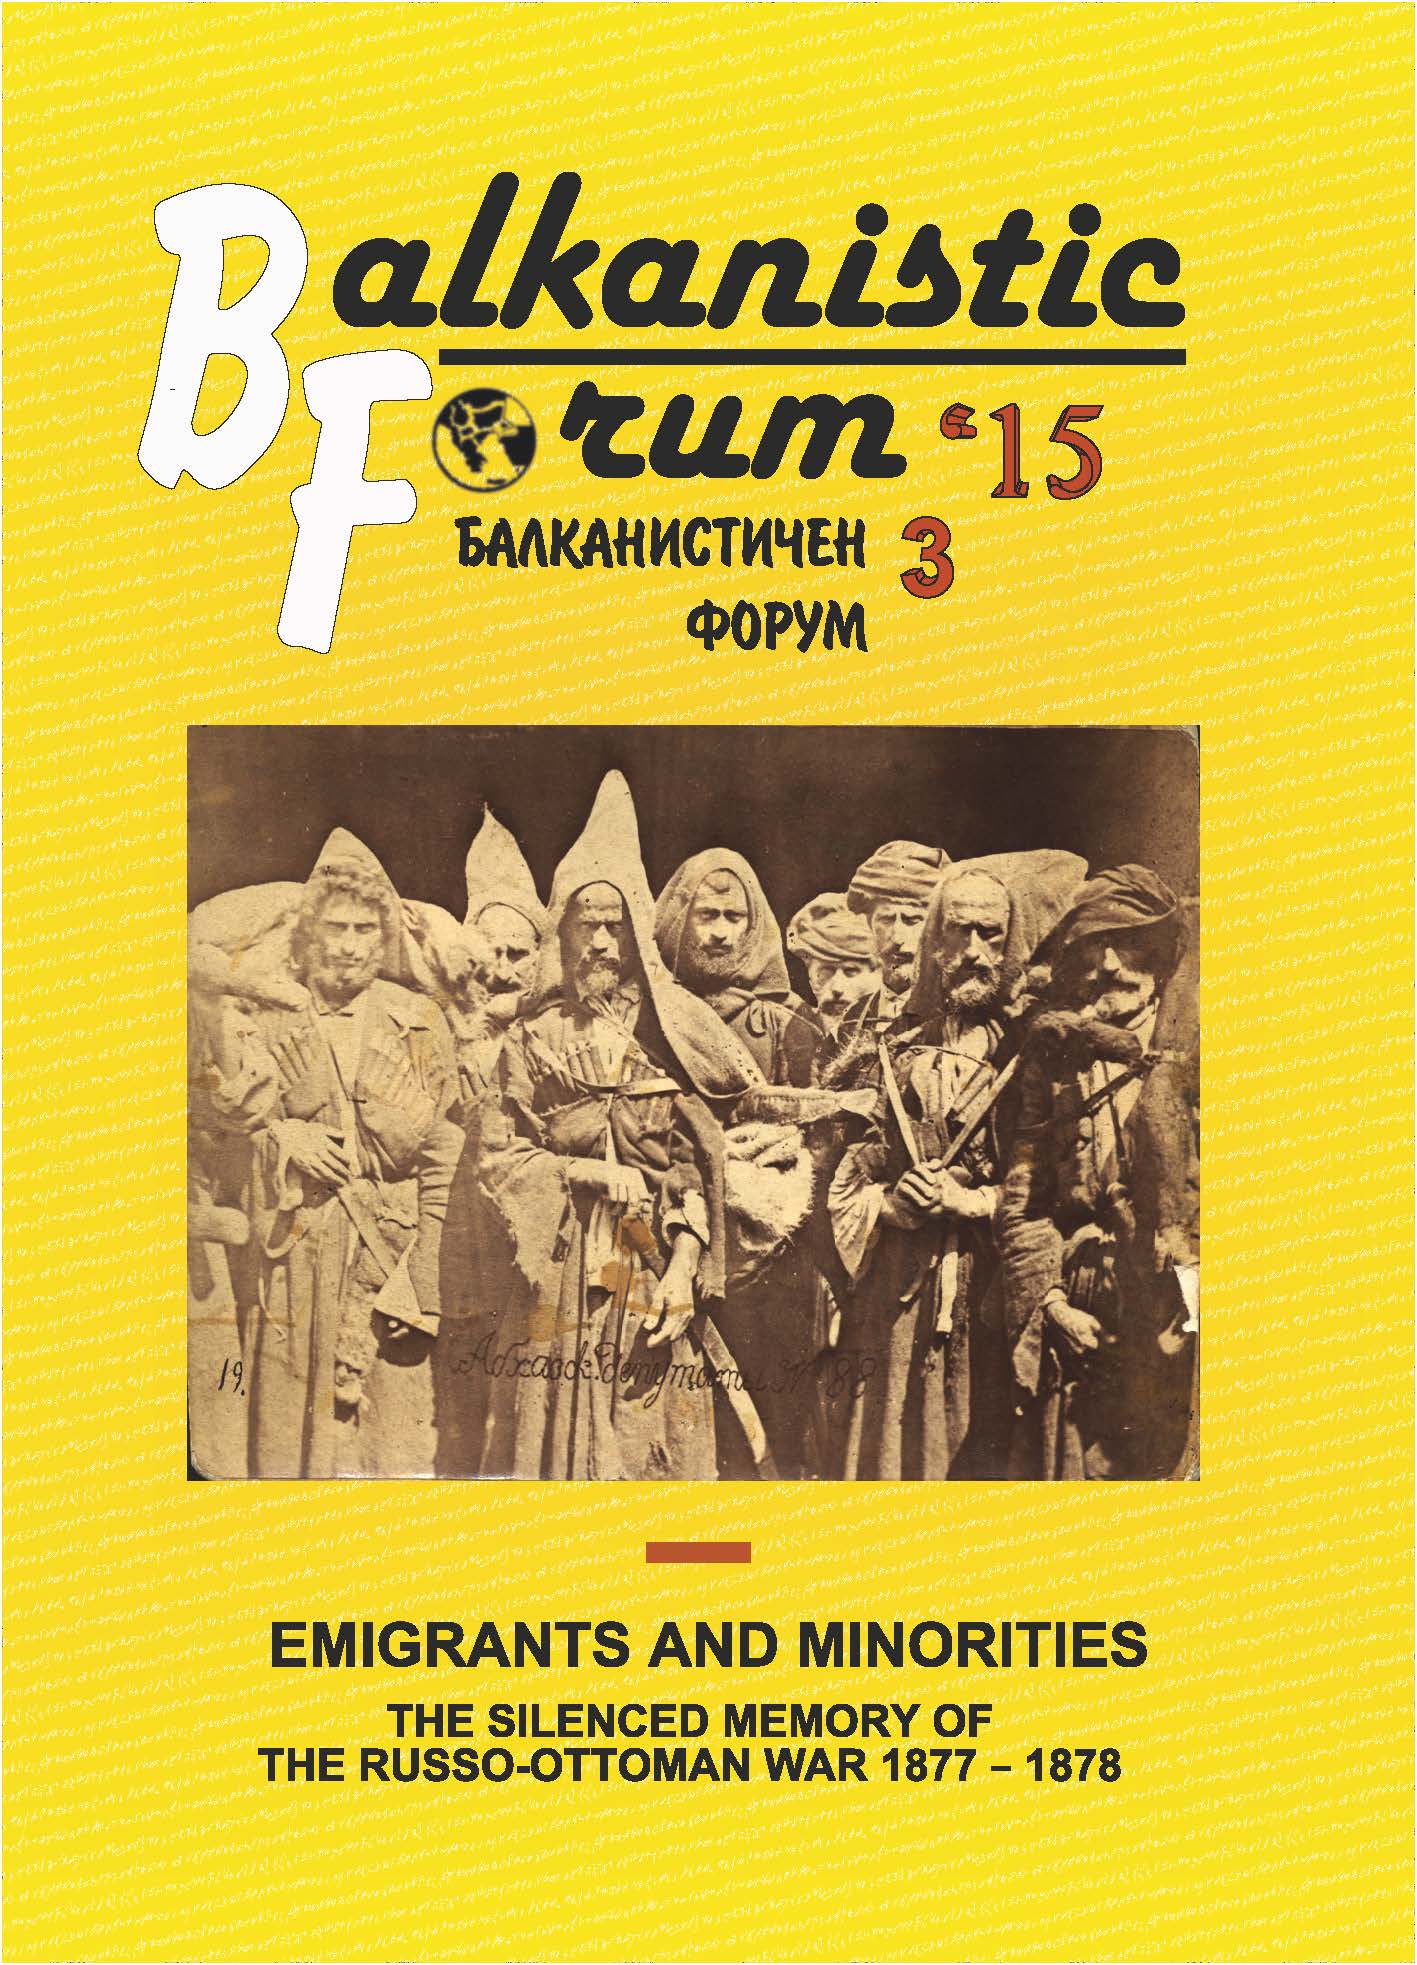 National Minorities of Armenia during the Russo-Ottoman War of 1877 – 1878